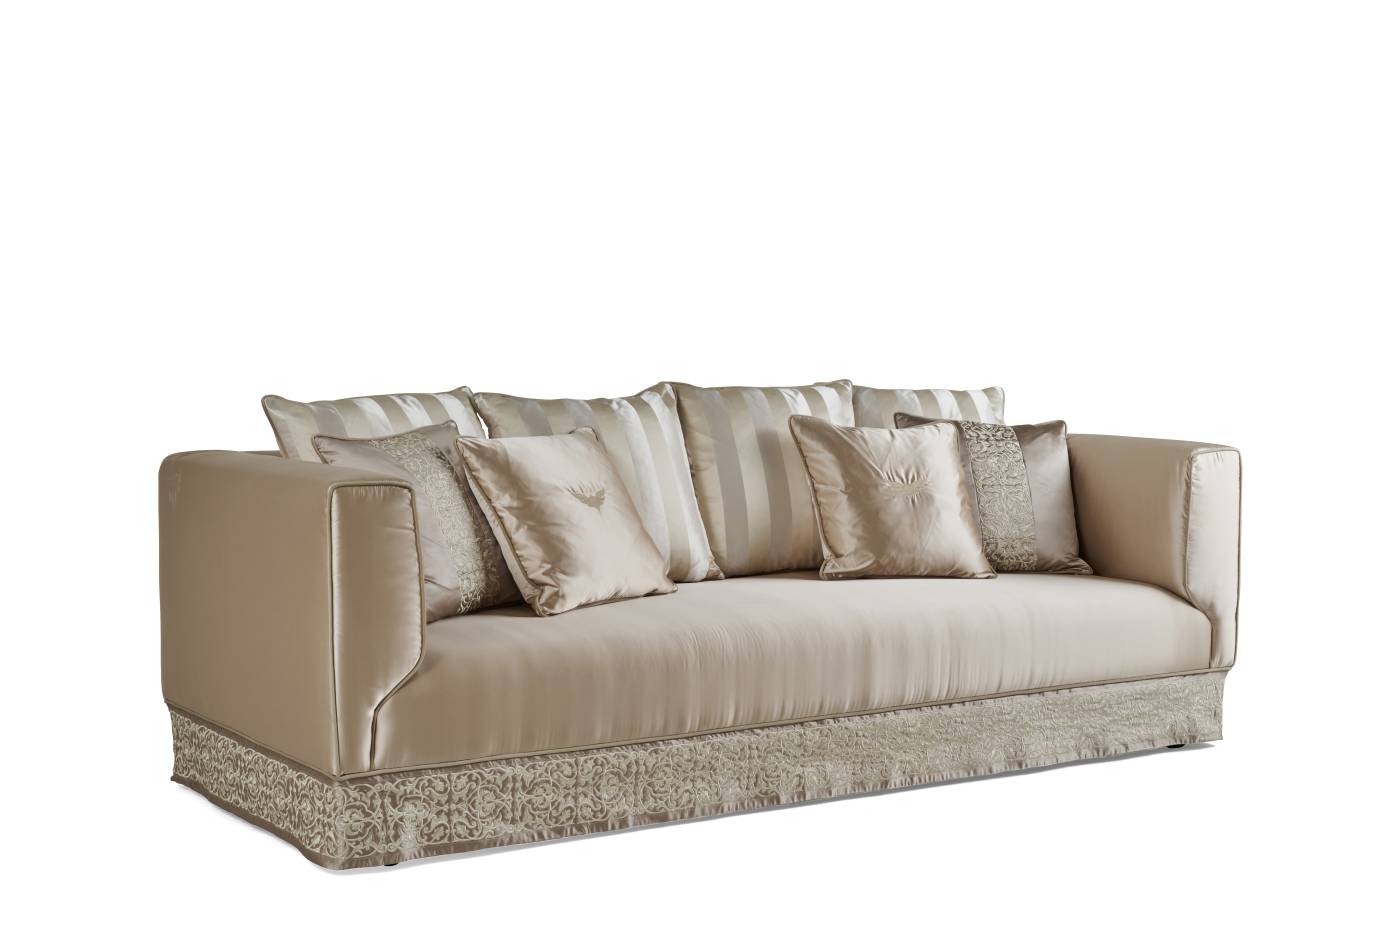 BRODERIE 3-seater sofa - Discover the elegance of luxury Héritage collection by Jumbo collection